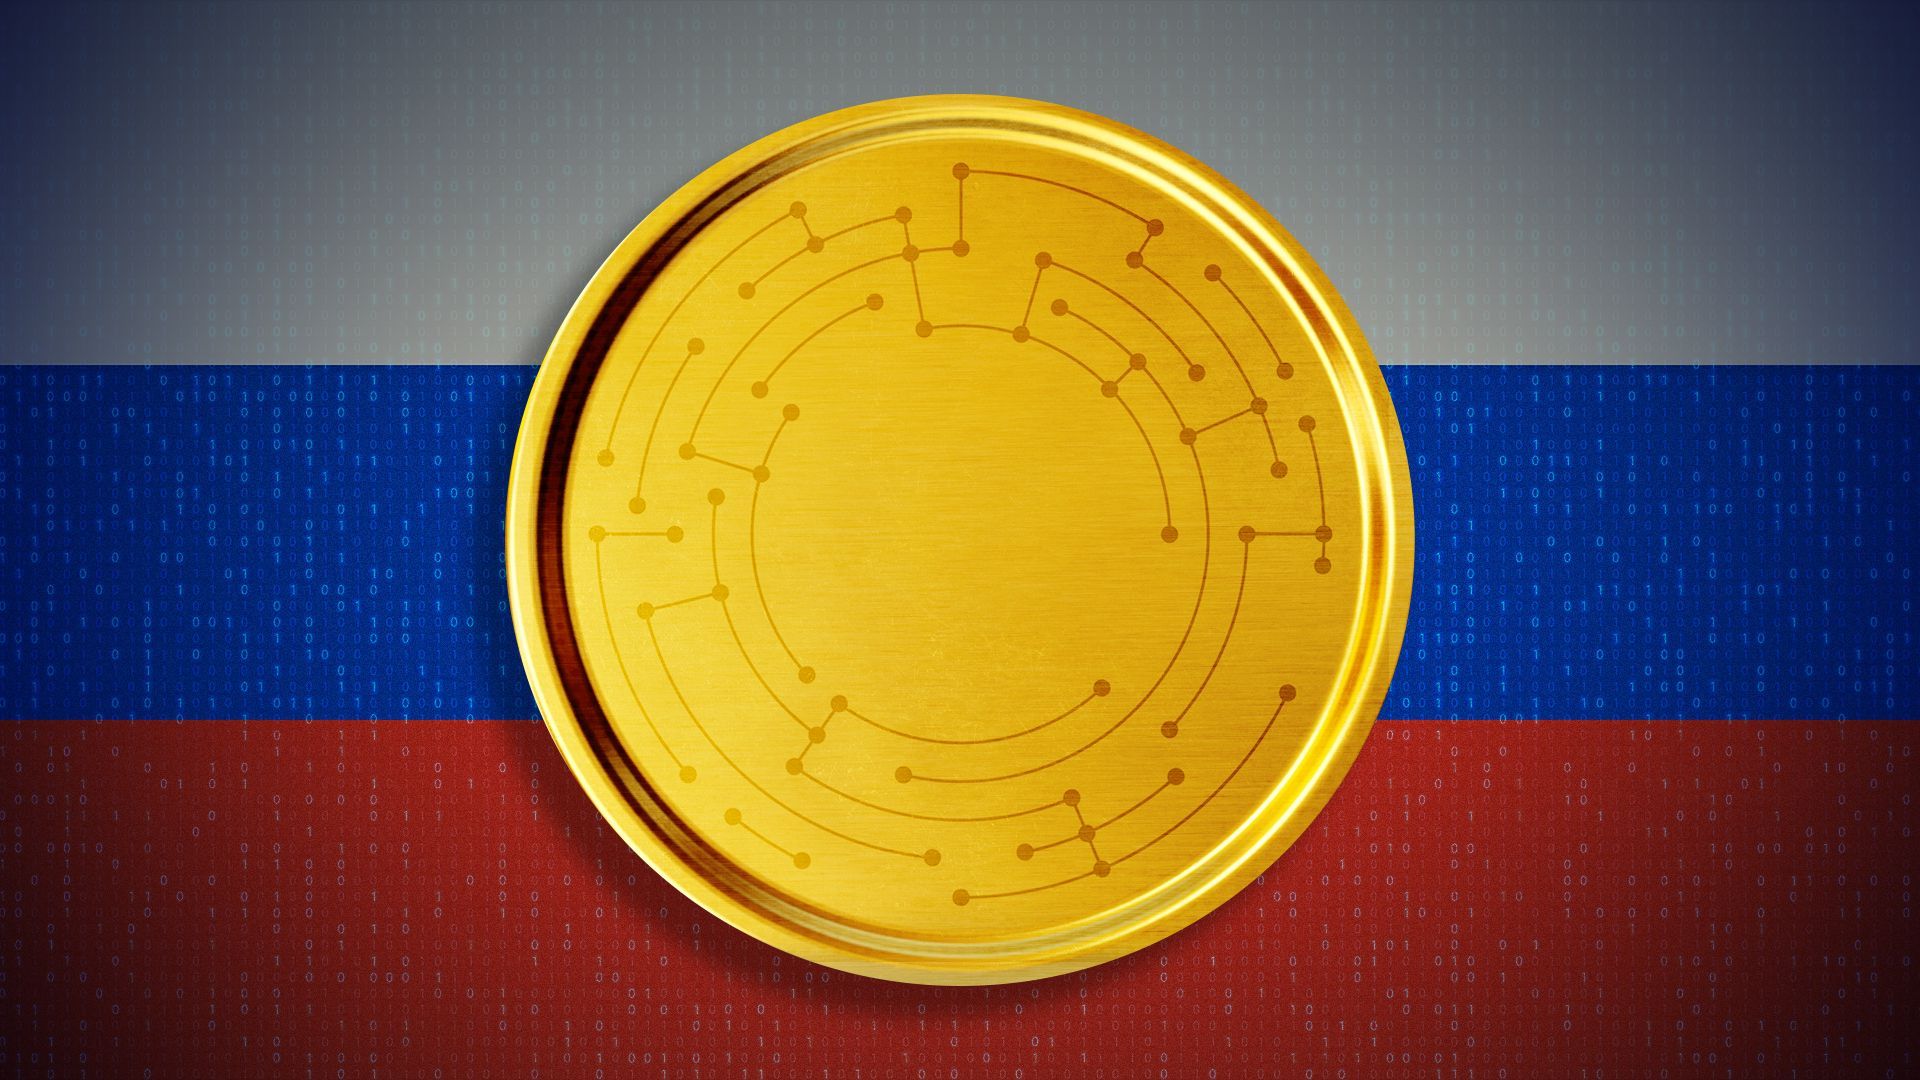 Illustration of a crypto coin against the Russian flag.